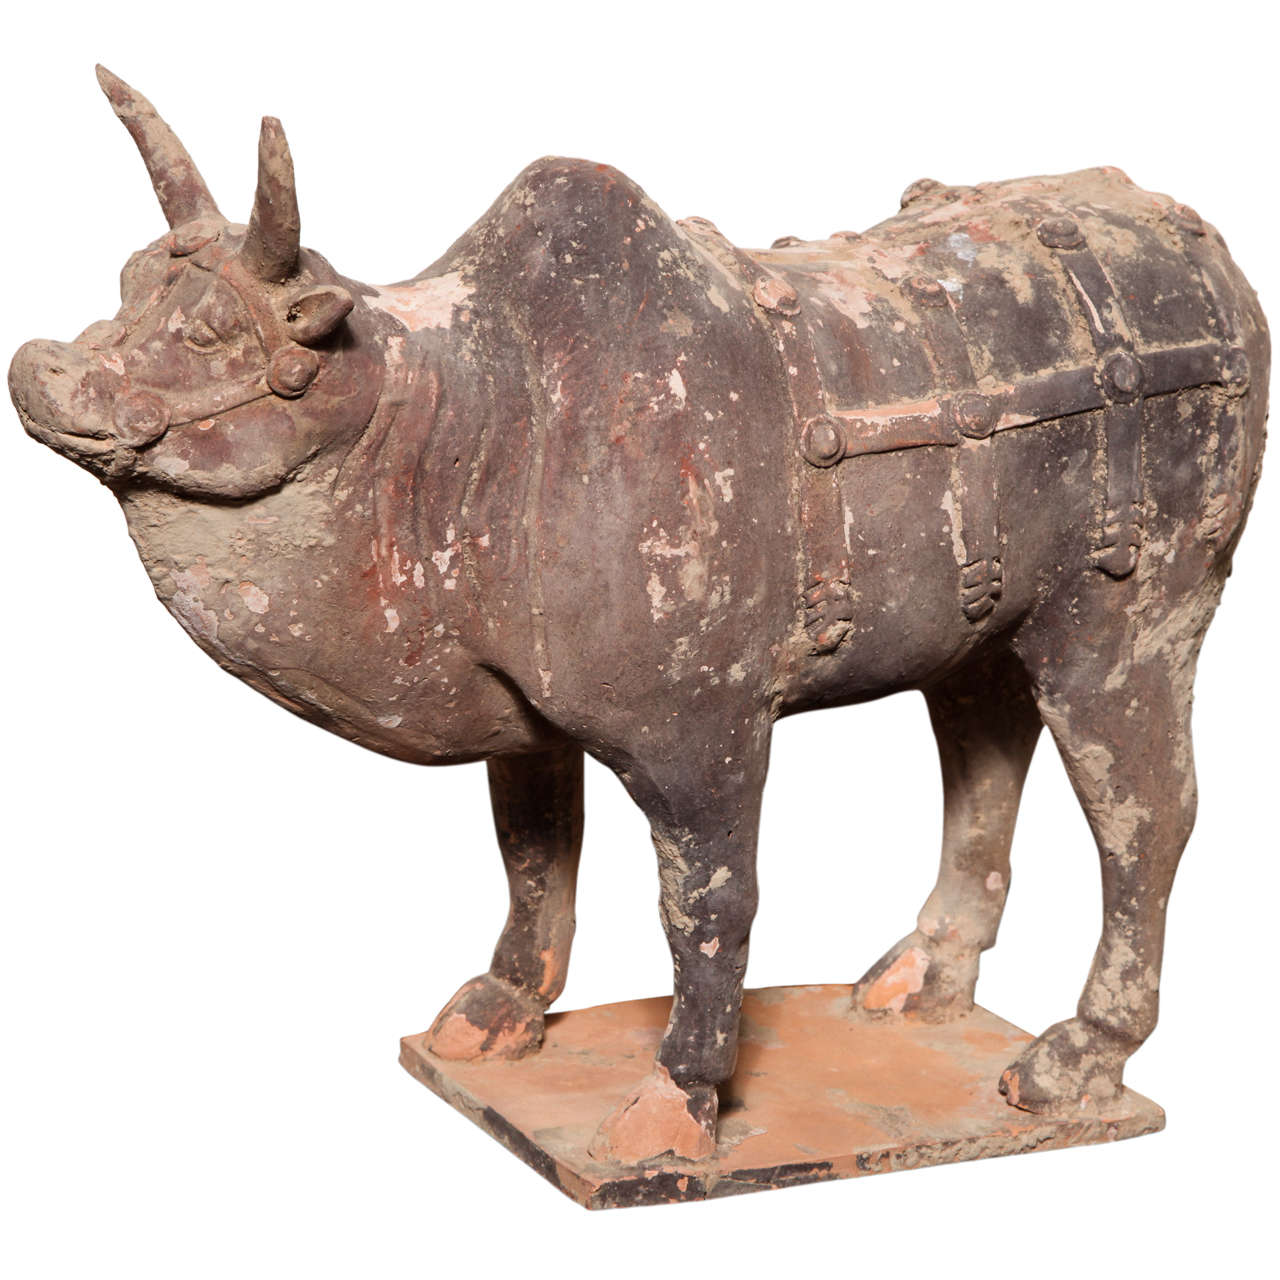 Tang Dynasty Painted Terracotta Animal Figure from China, circa 618-907 A.D